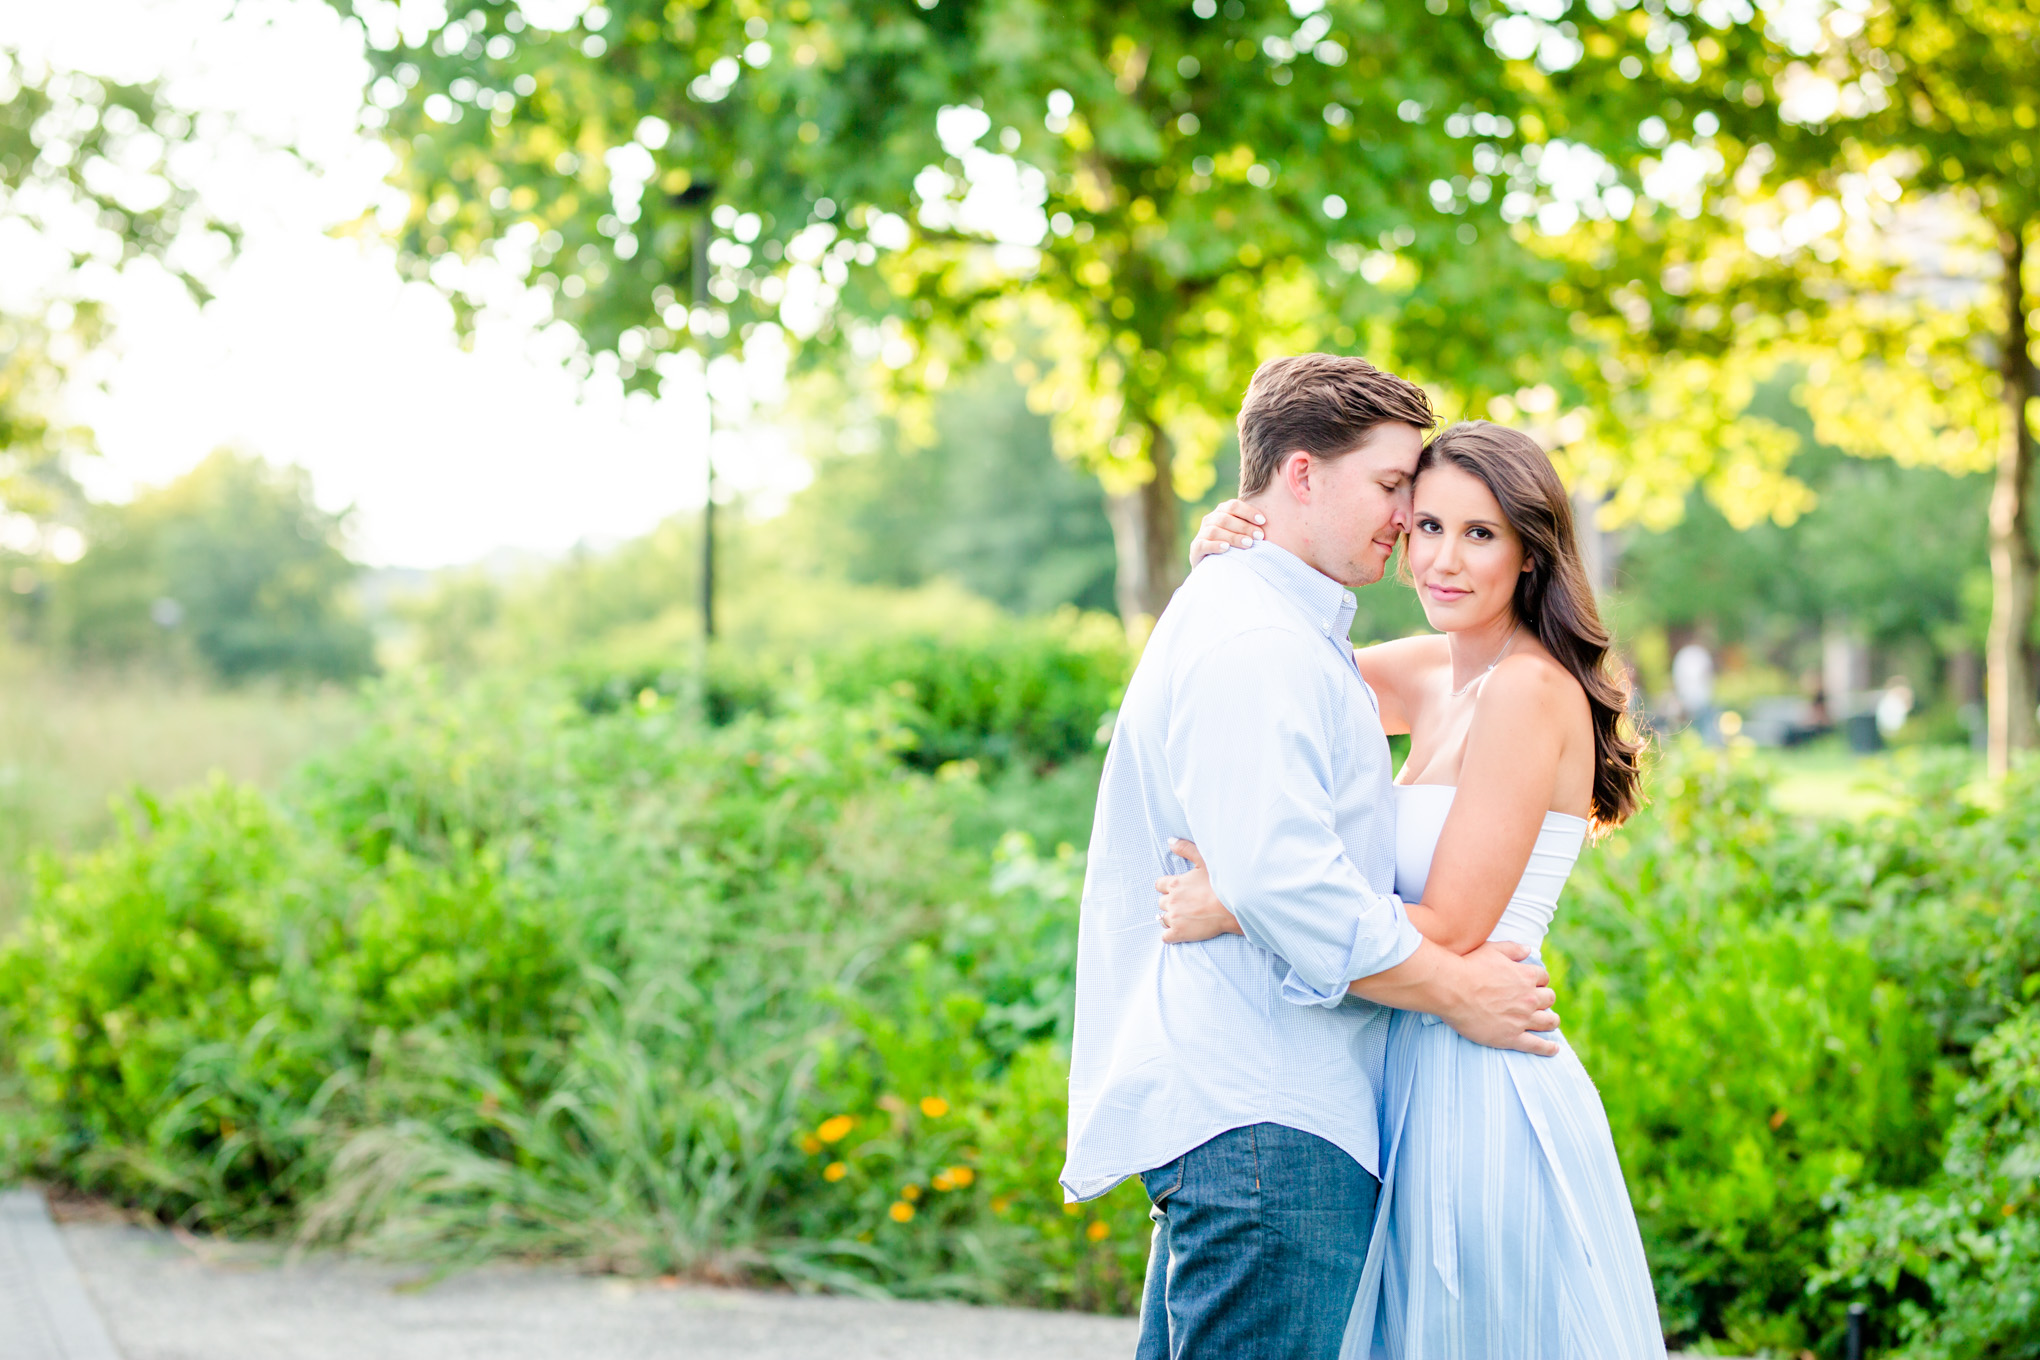 prepare for engagement photos, engagement photo tips, tips for engagement photos, how to prepare for photos, how to prepare for your engagement session, photo shoot tips, engagement session tips, D.C. engagement photos, D.C. wedding photographer, D.C. photographer, Rachel E.H. Photography, photography tips, engaged couple